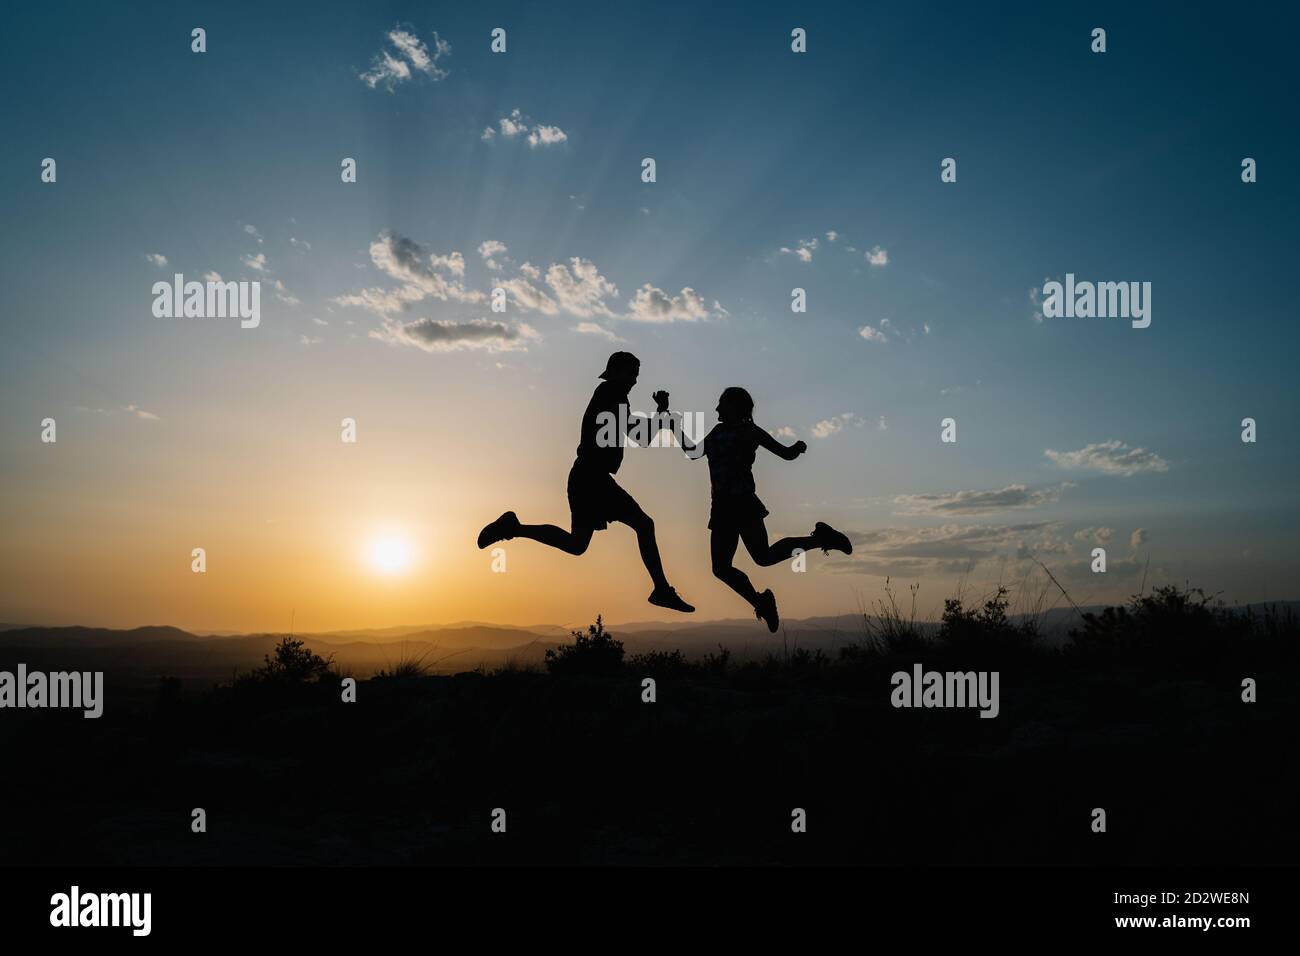 Side view silhouettes of unrecognizable male and female friends jumping high above ground while having fun and enjoying freedom in hilly terrain against sunset sky Stock Photo